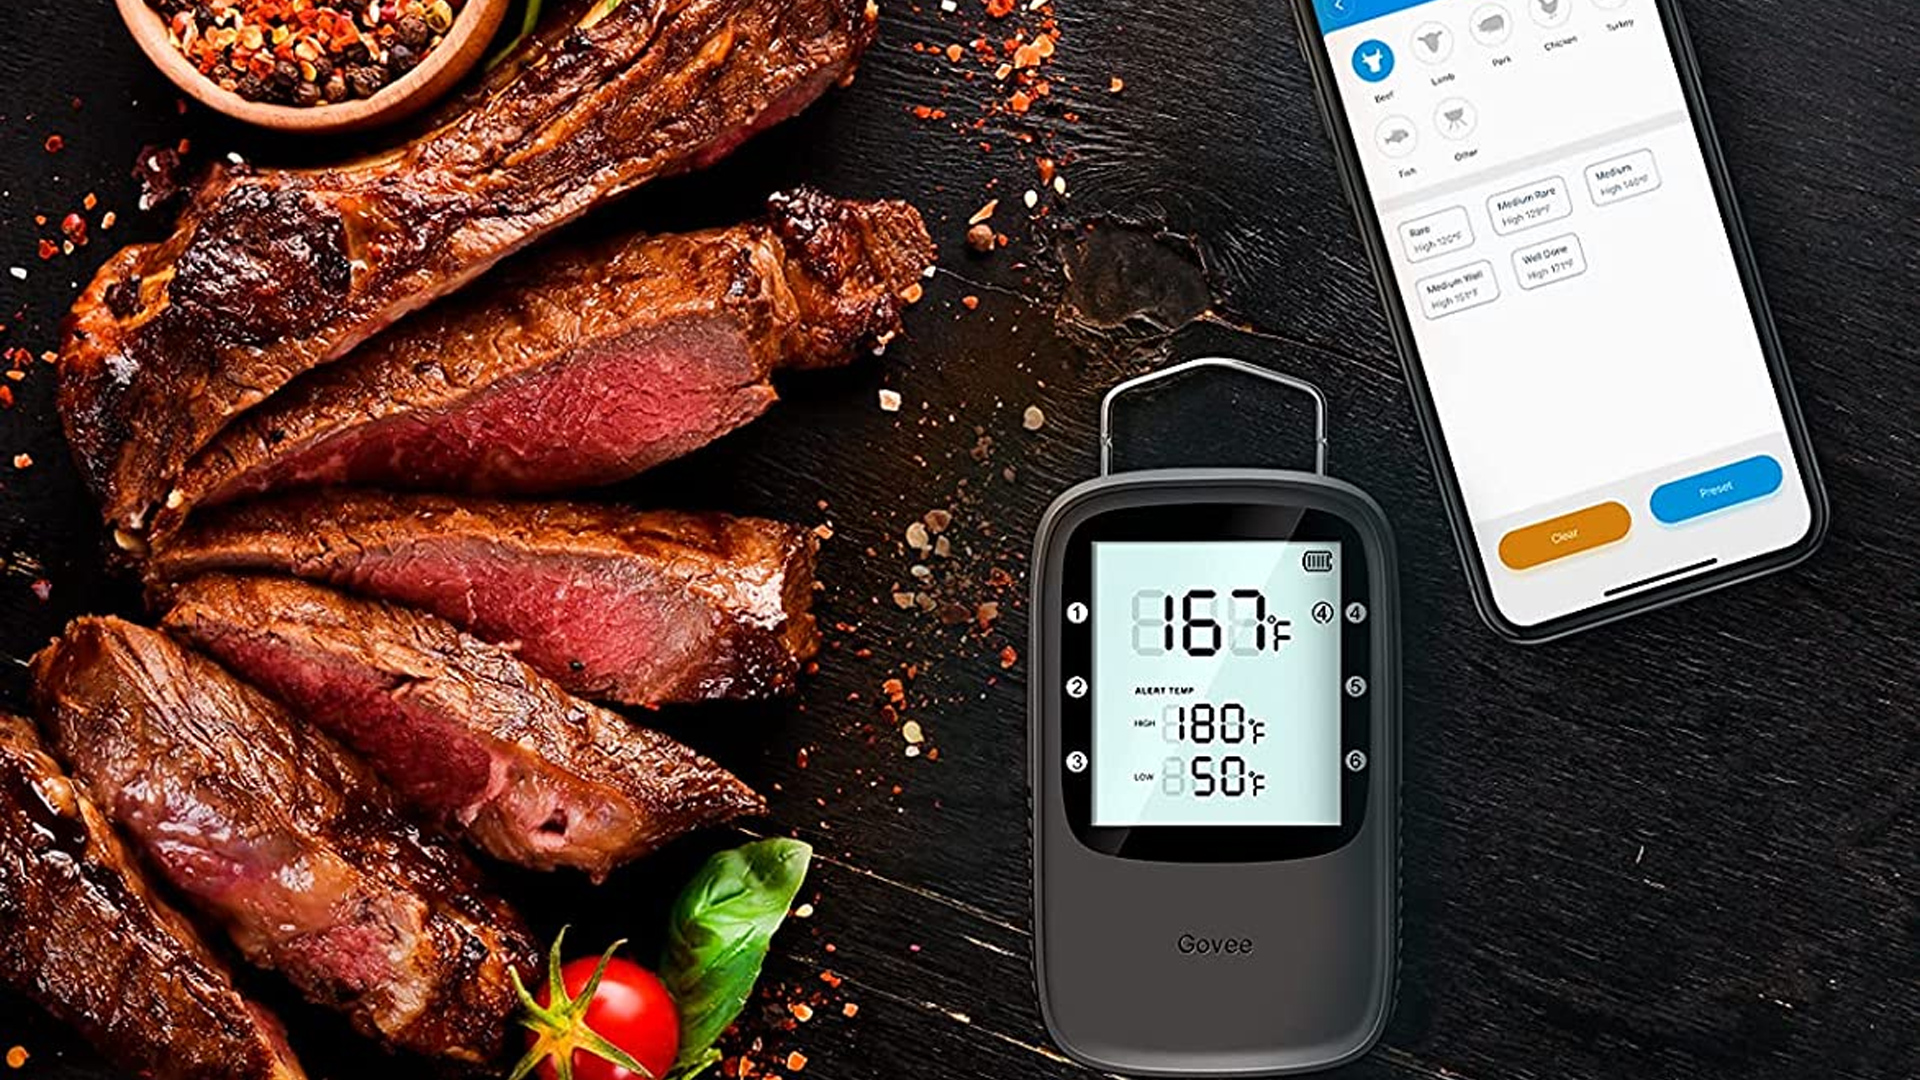 https://9to5toys.com/wp-content/uploads/sites/5/2022/02/govee-smart-bluetooth-meat-thermometer.jpg